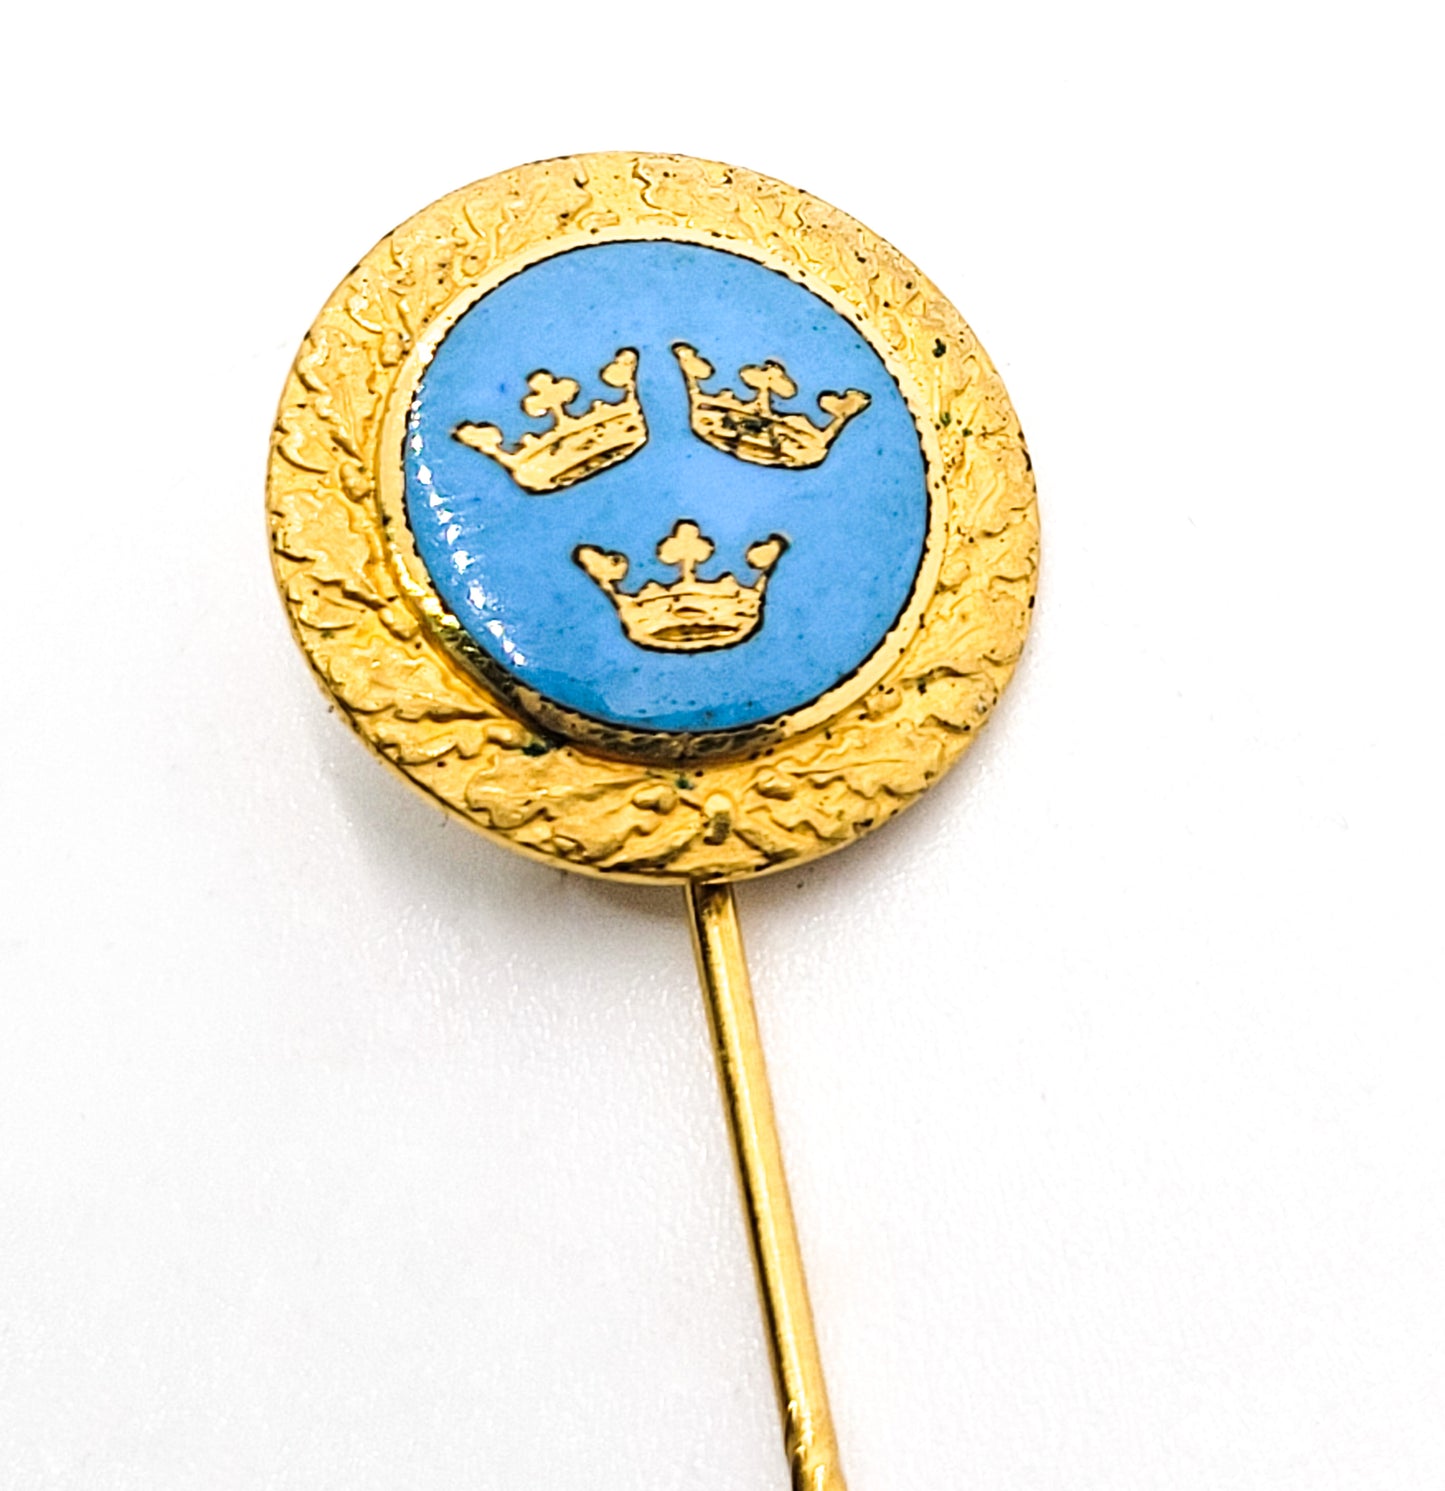 CC Sporrong co Stockholm Royal Oder of Sweden three crowns vitnage lapel pin